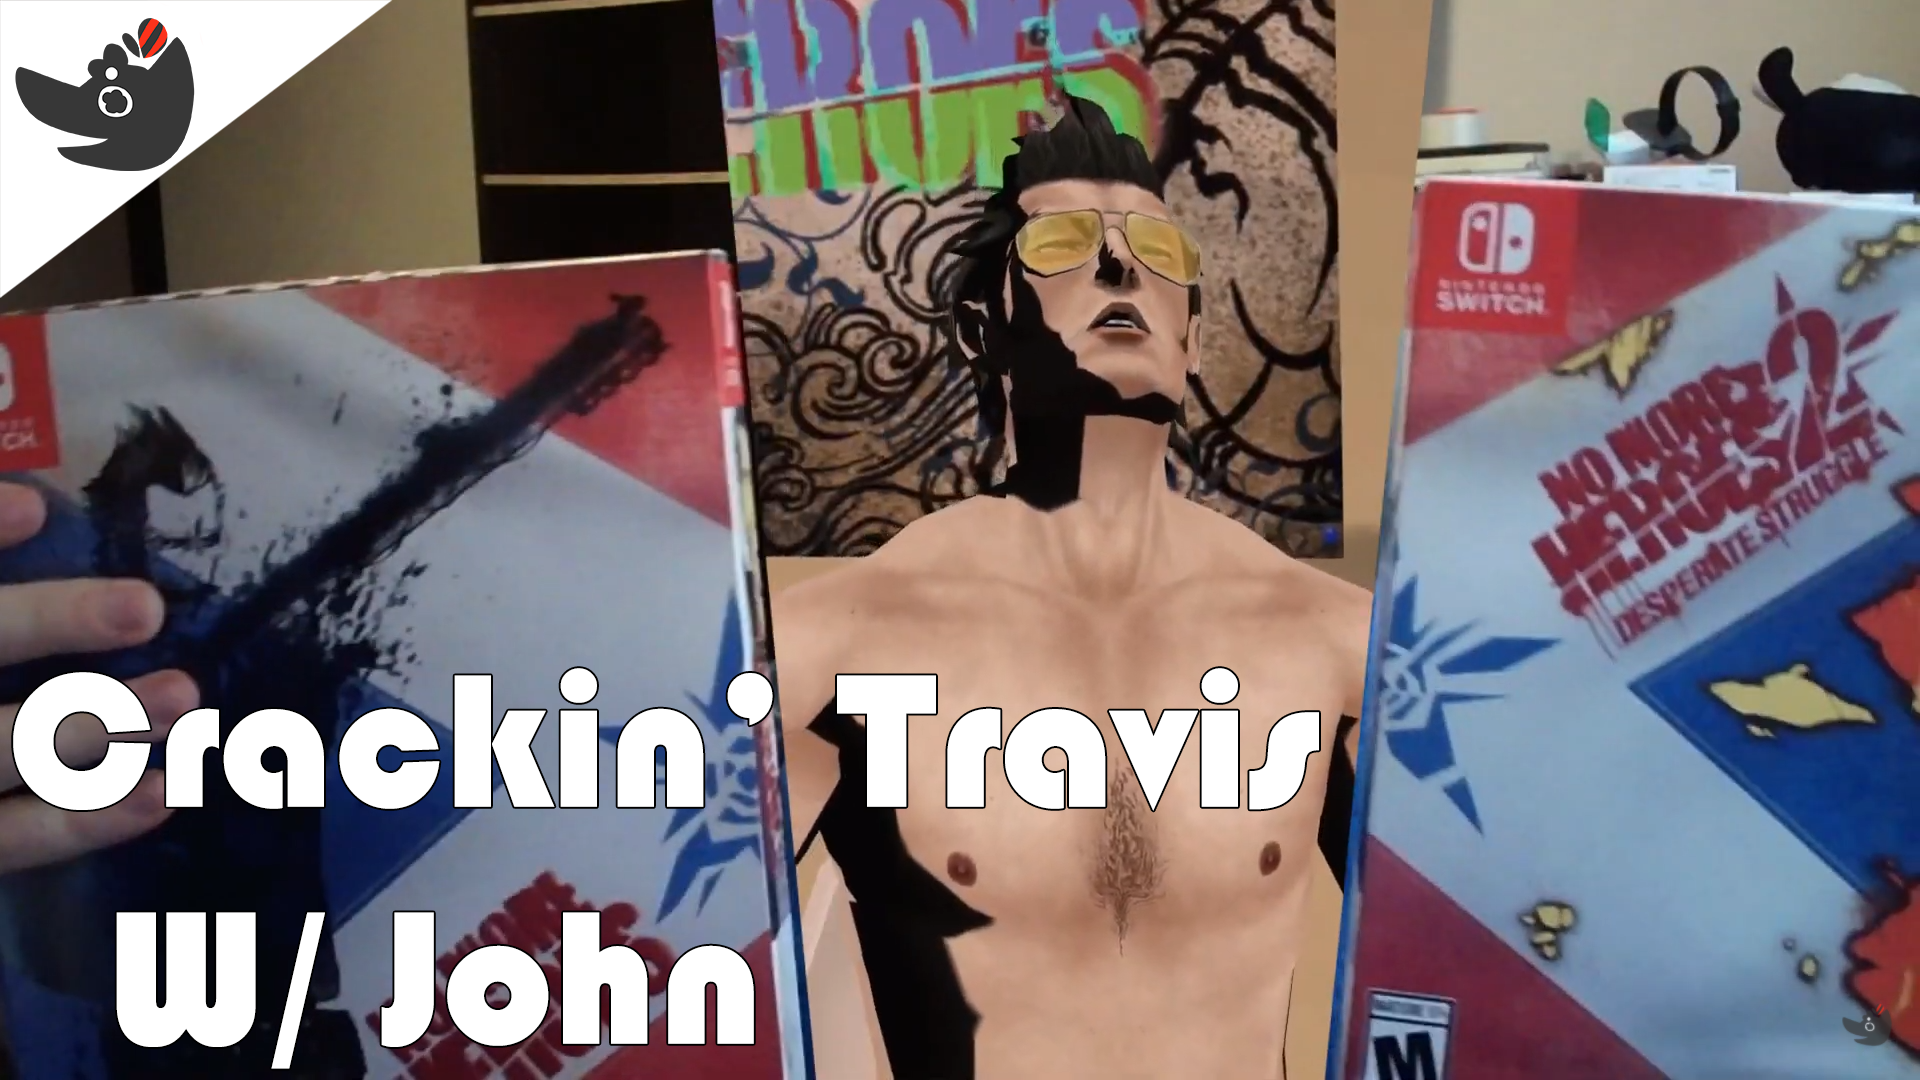 Travis Touchdown opening Limited Run's No More Heroes 1 and 2 packs, the text says "Crackin' Travis w/ John"